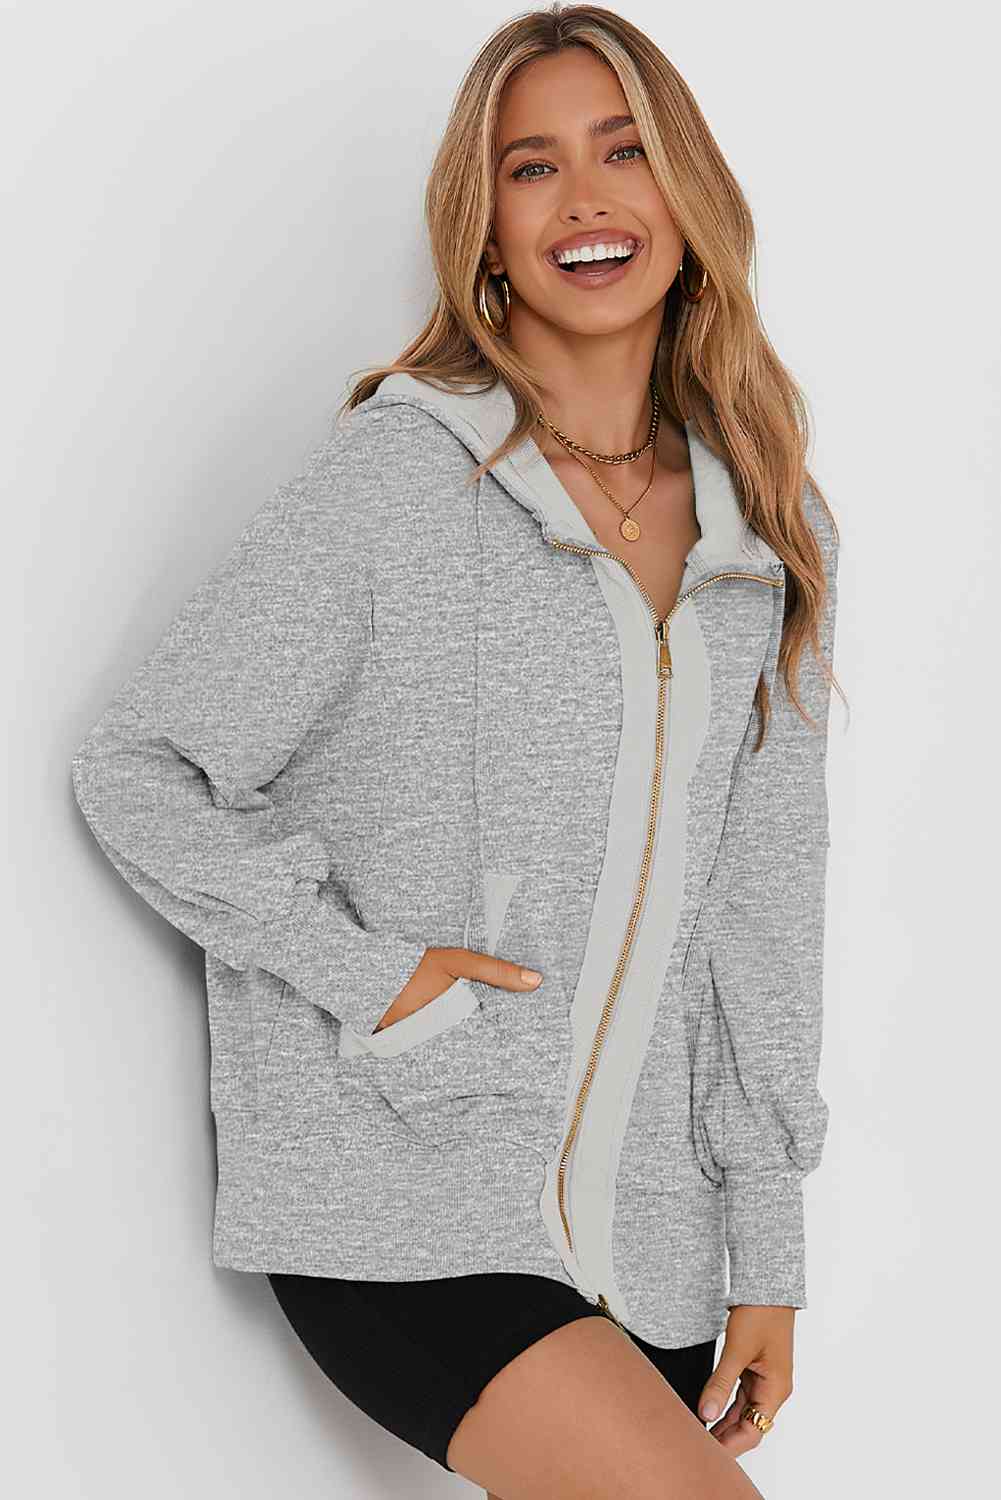 Gray Zip Up Long Sleeve Drawstring Hoodie Sentient Beauty Fashions Apparel & Accessories